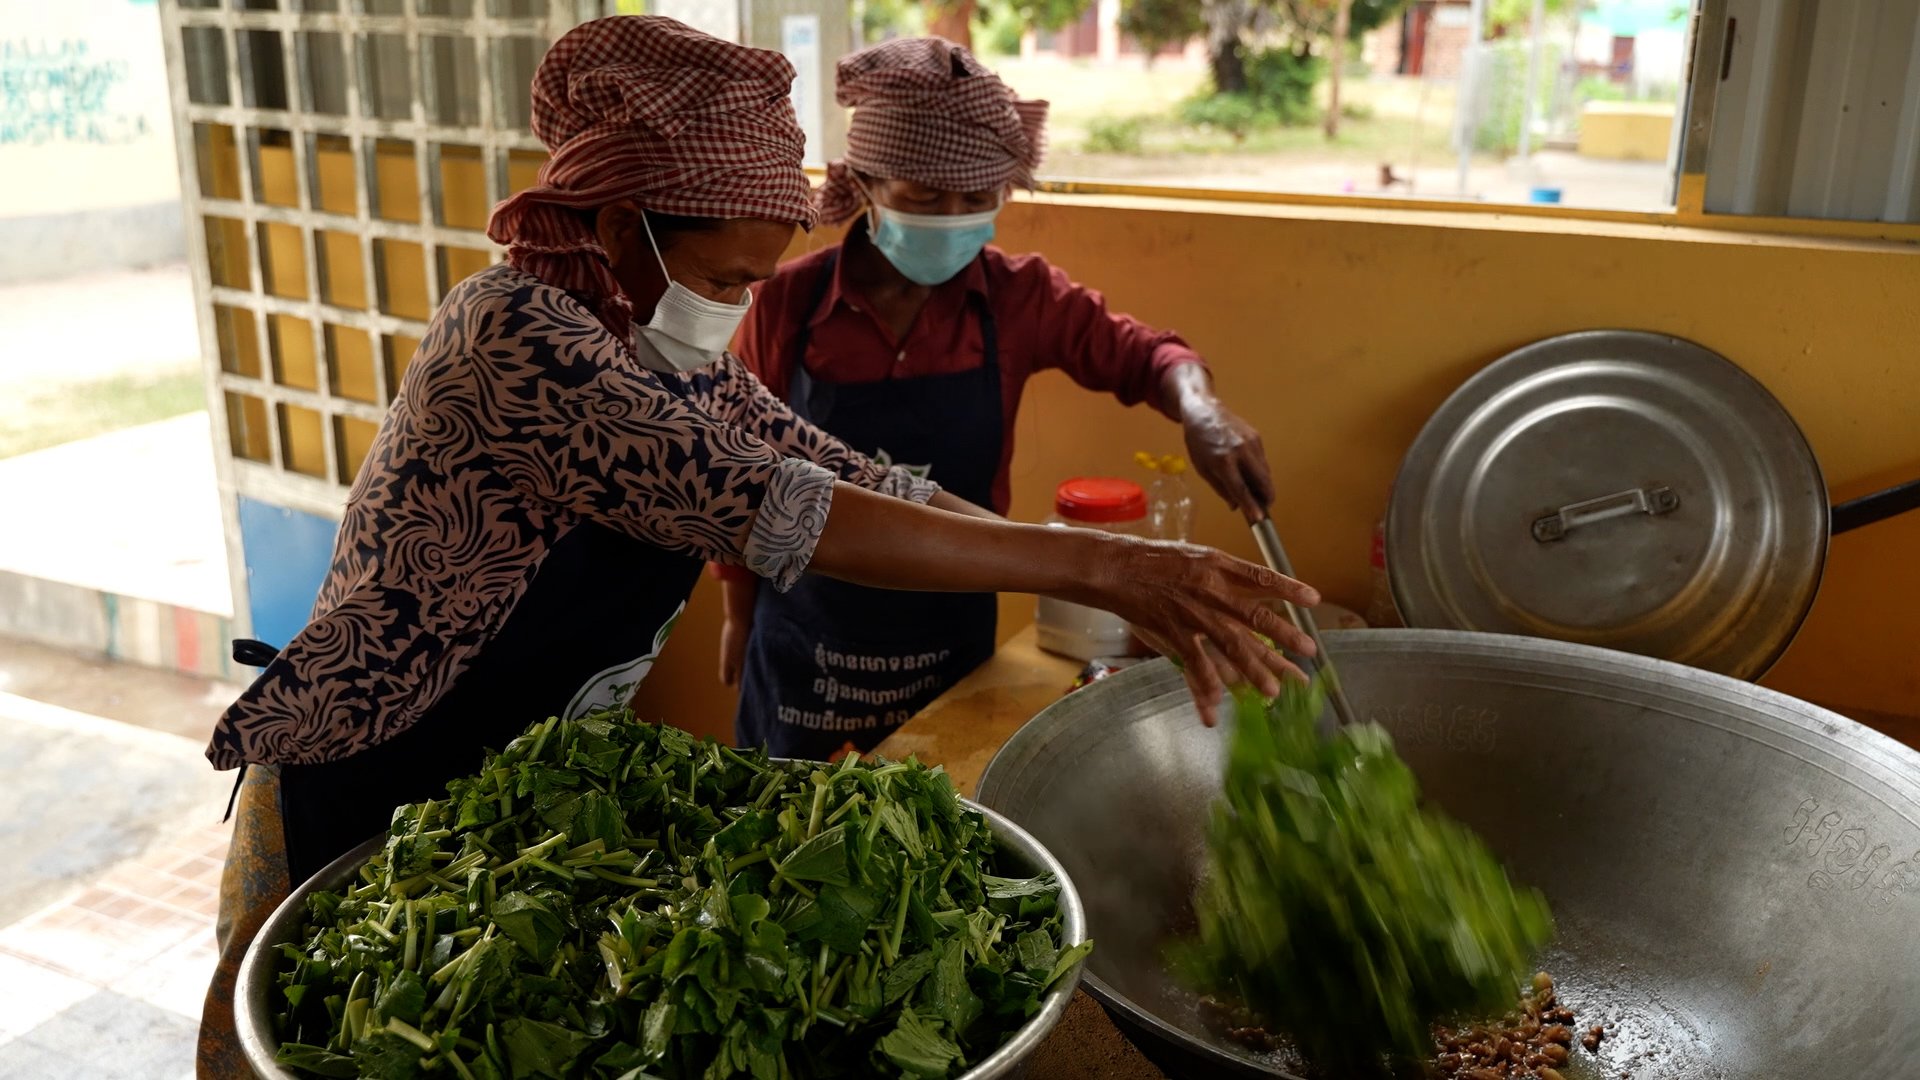 School cooks cook vegetables. Frame grab while working as an NGO videographer for WFP Cambodia